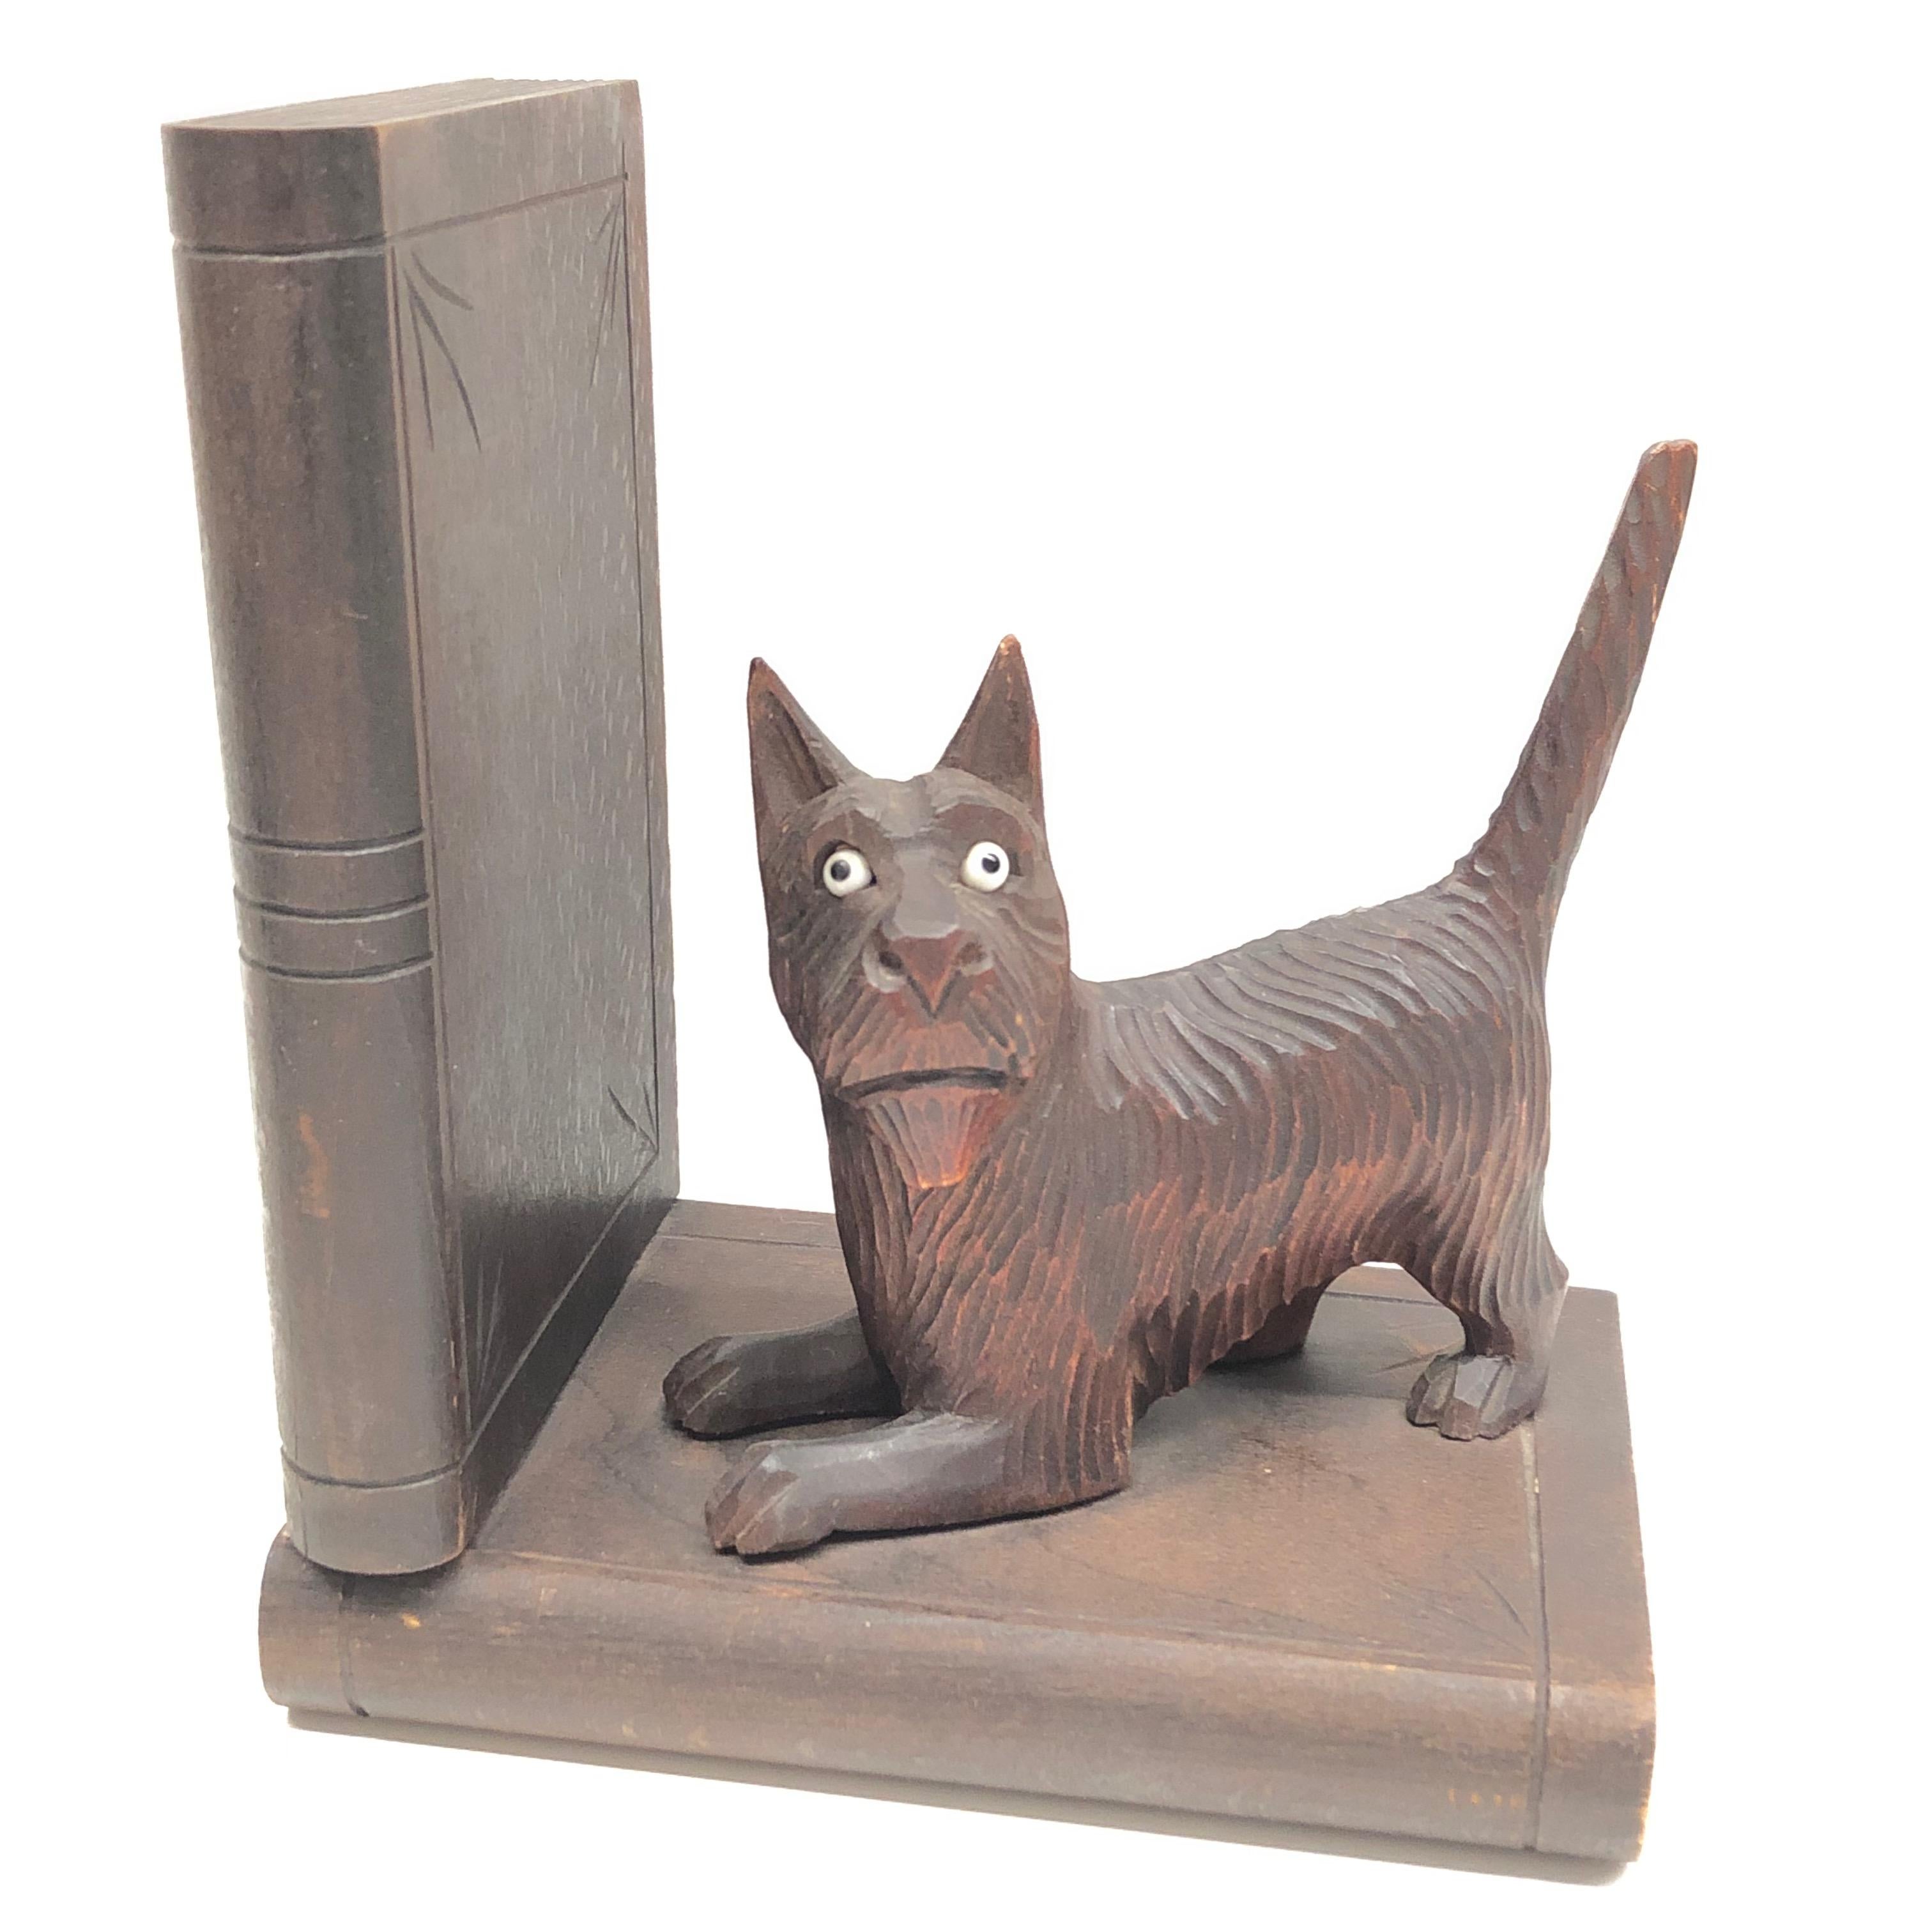 Classic early 1900s Black Forest wood carved cat and dog bookends. Nice addition to your room or just for use on your shelf. Found at an estate sale in Nuremberg, Germany. The animals are hand carved and have glass eyes.